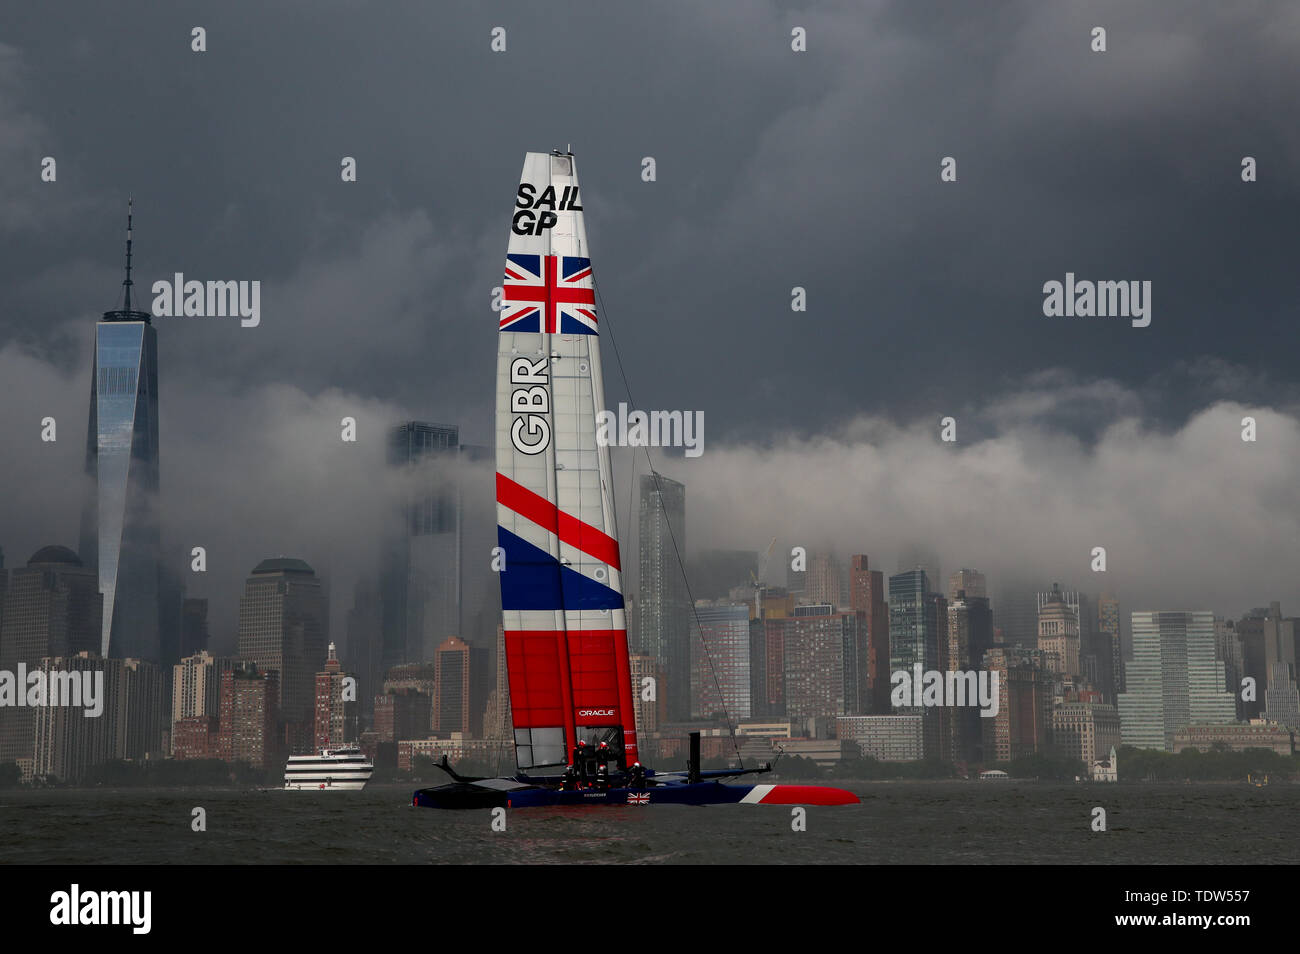 Great Britain SailGP Team skippered by Dylan Fletcher sails past the One World Trade Center as the practice race is cancelled due to bad weather at the Event 3 Season 1 SailGP event in New York City. Stock Photo